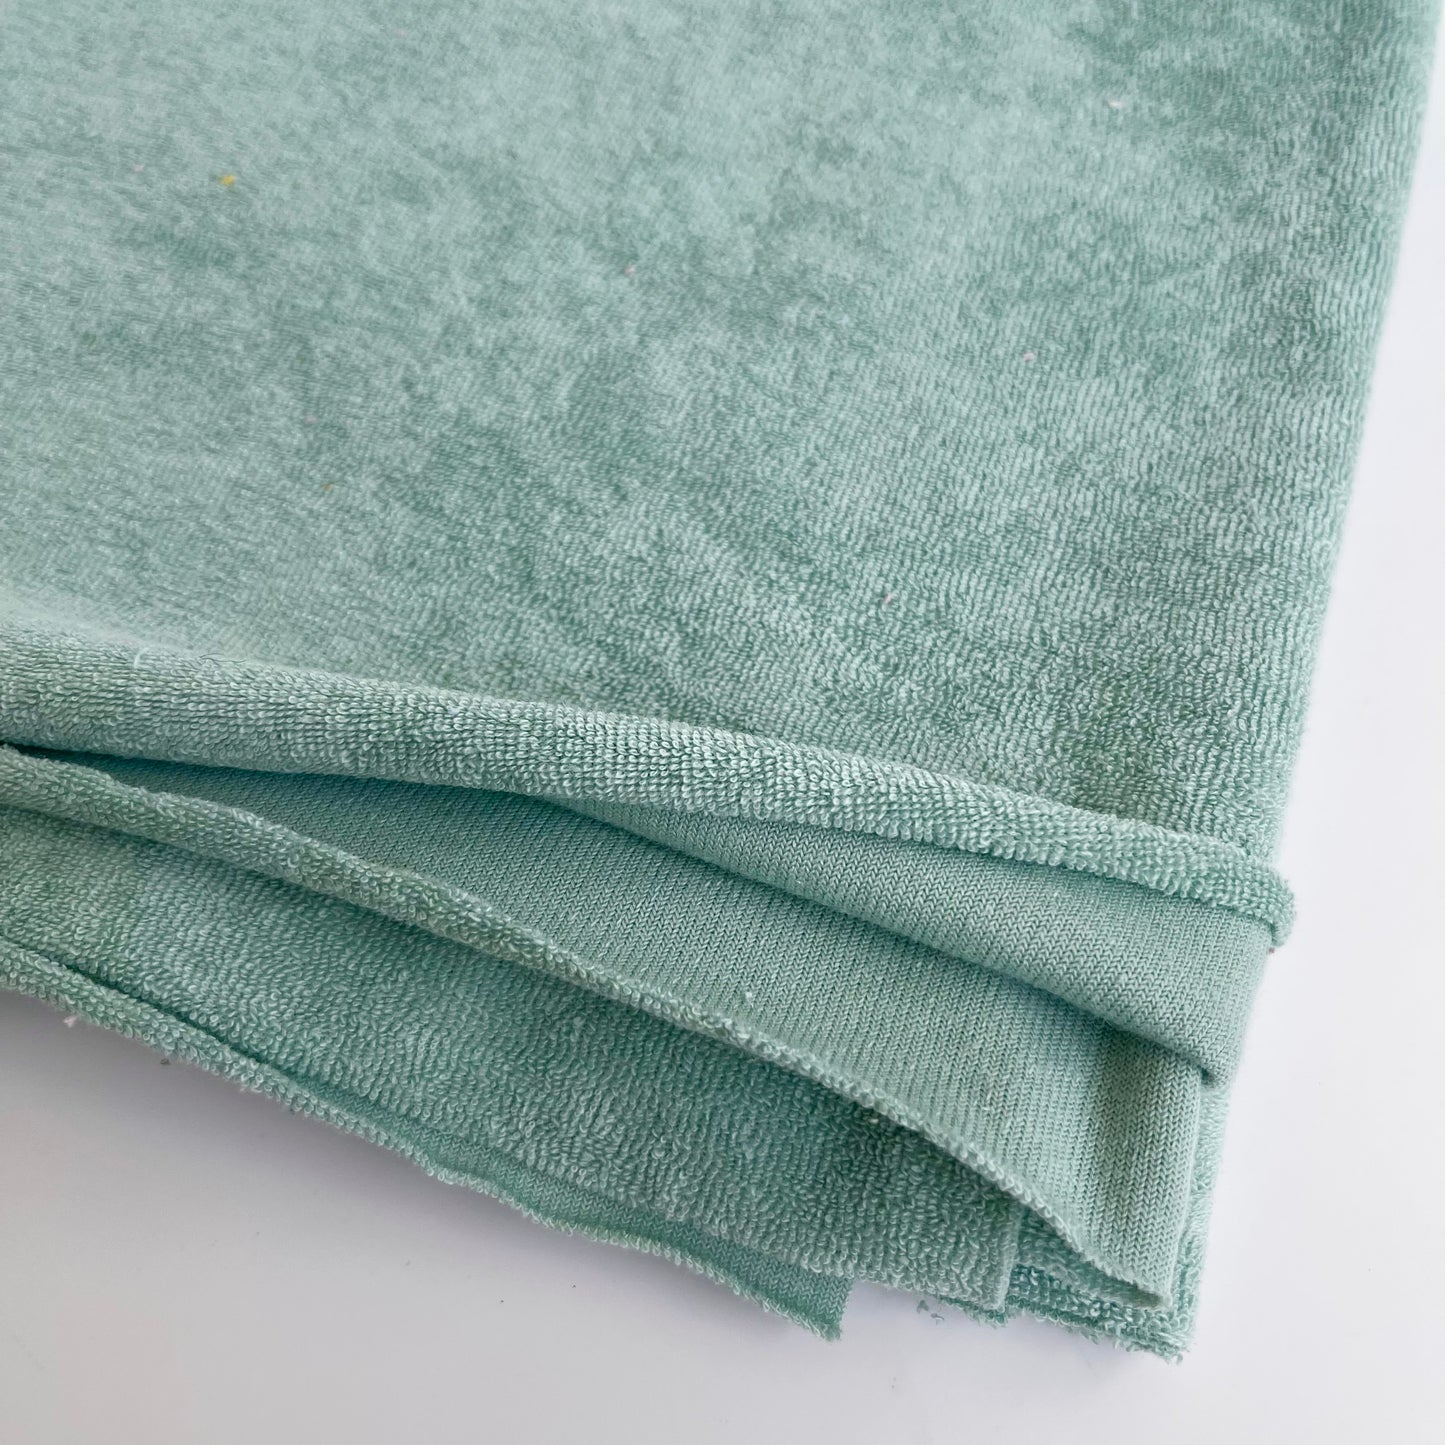 Euro Toweling | Mint | Towel French Terry "Sponge" | BY THE HALF YARD